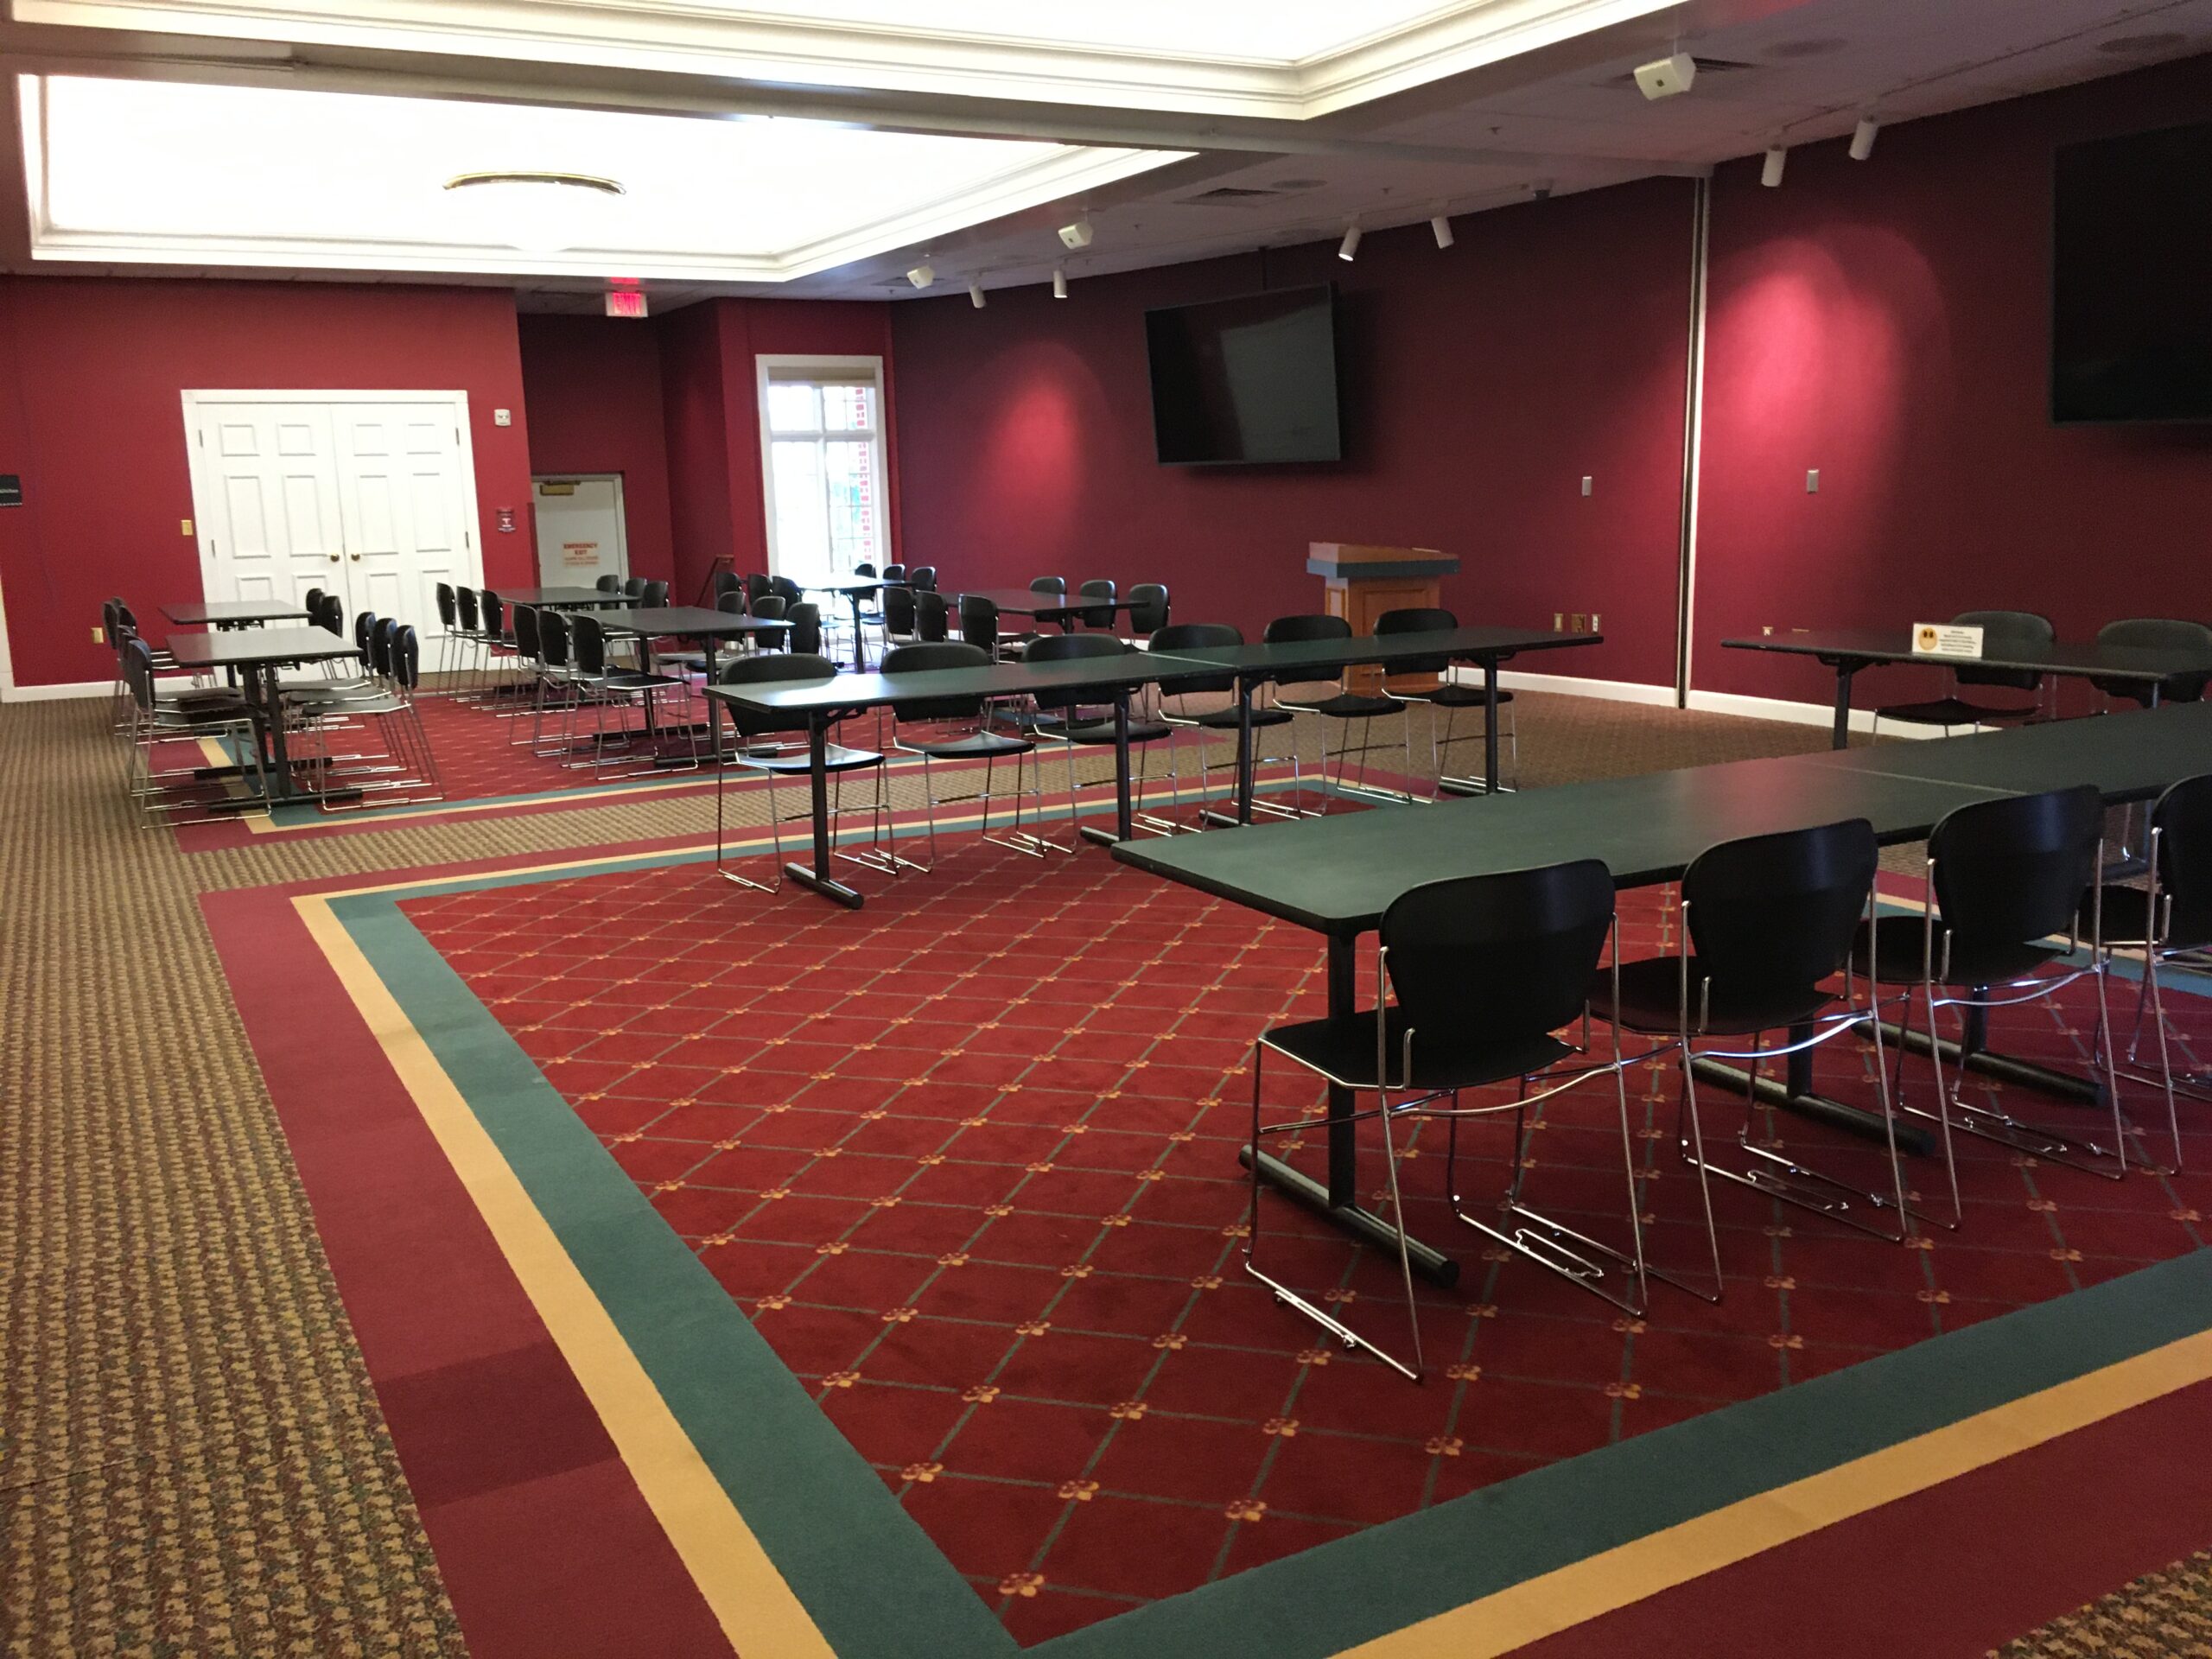 Walldorf-Dunning Room set up with chairs and tables